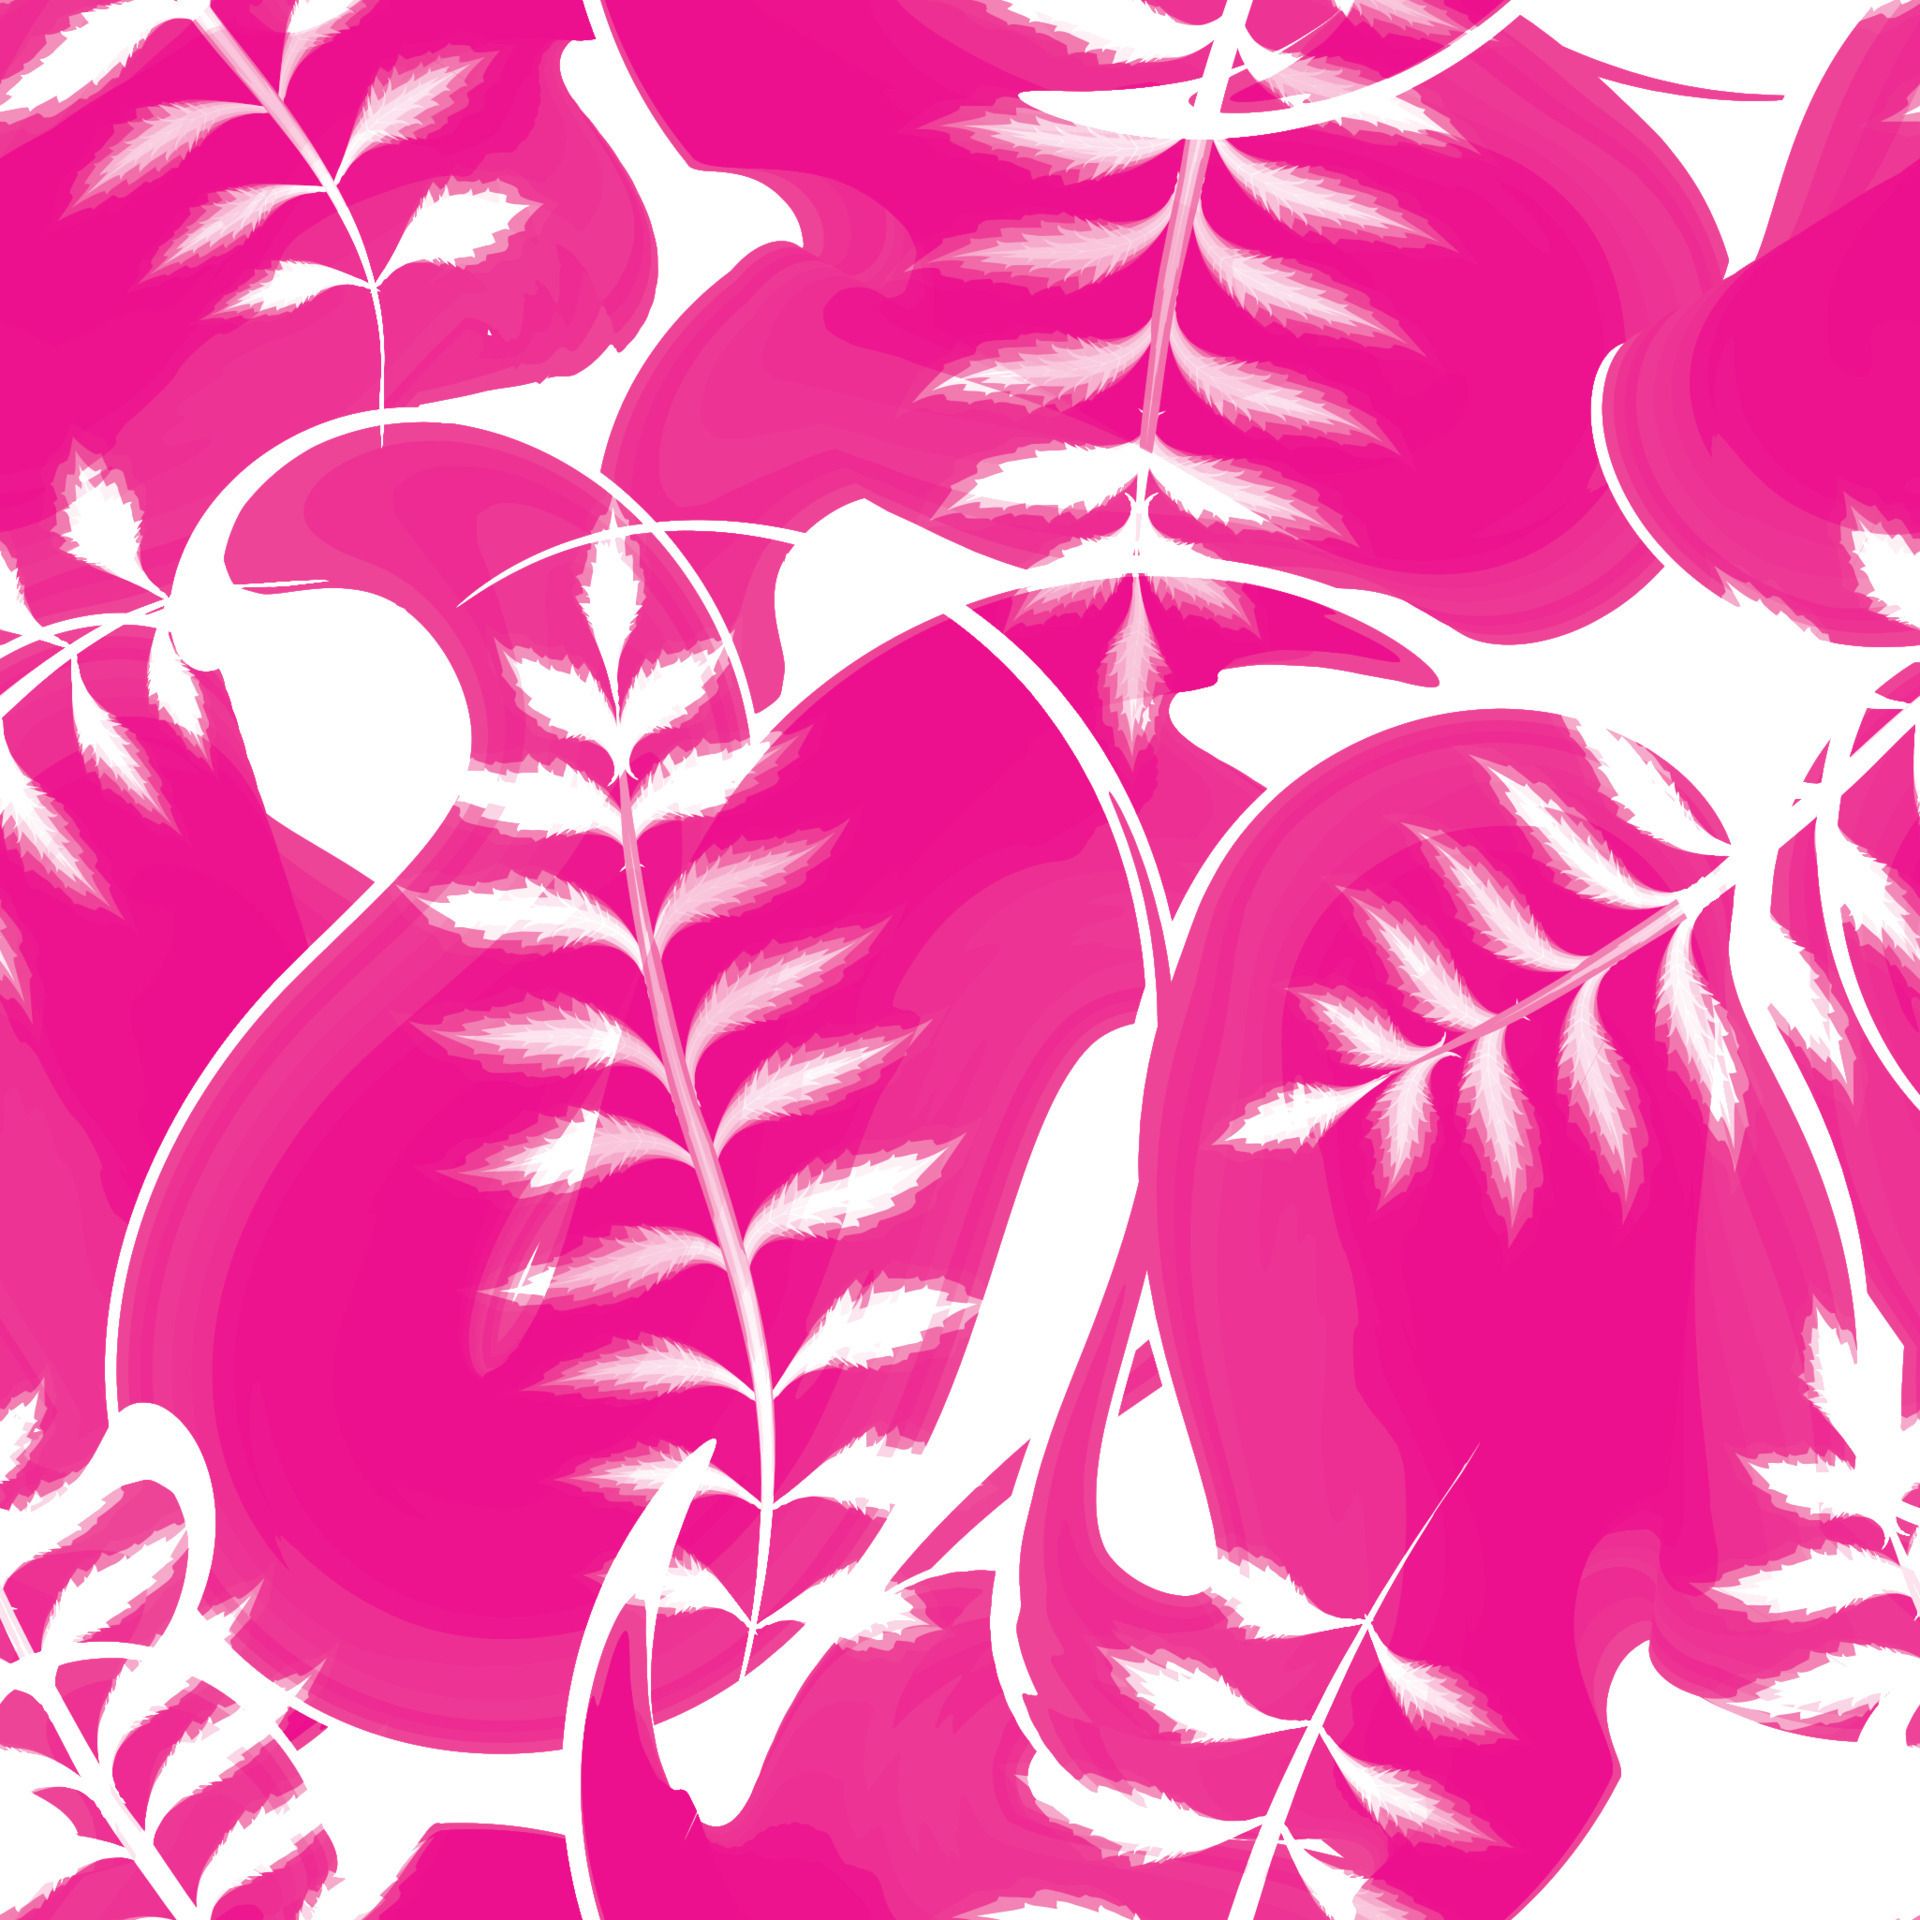 branch leaves seamless tropical pattern on pink background. abstract design pattern. Hand drawn summer backround. Goof for bedding, textile, fabric, wallpaper. Contour drawing. Sketch style